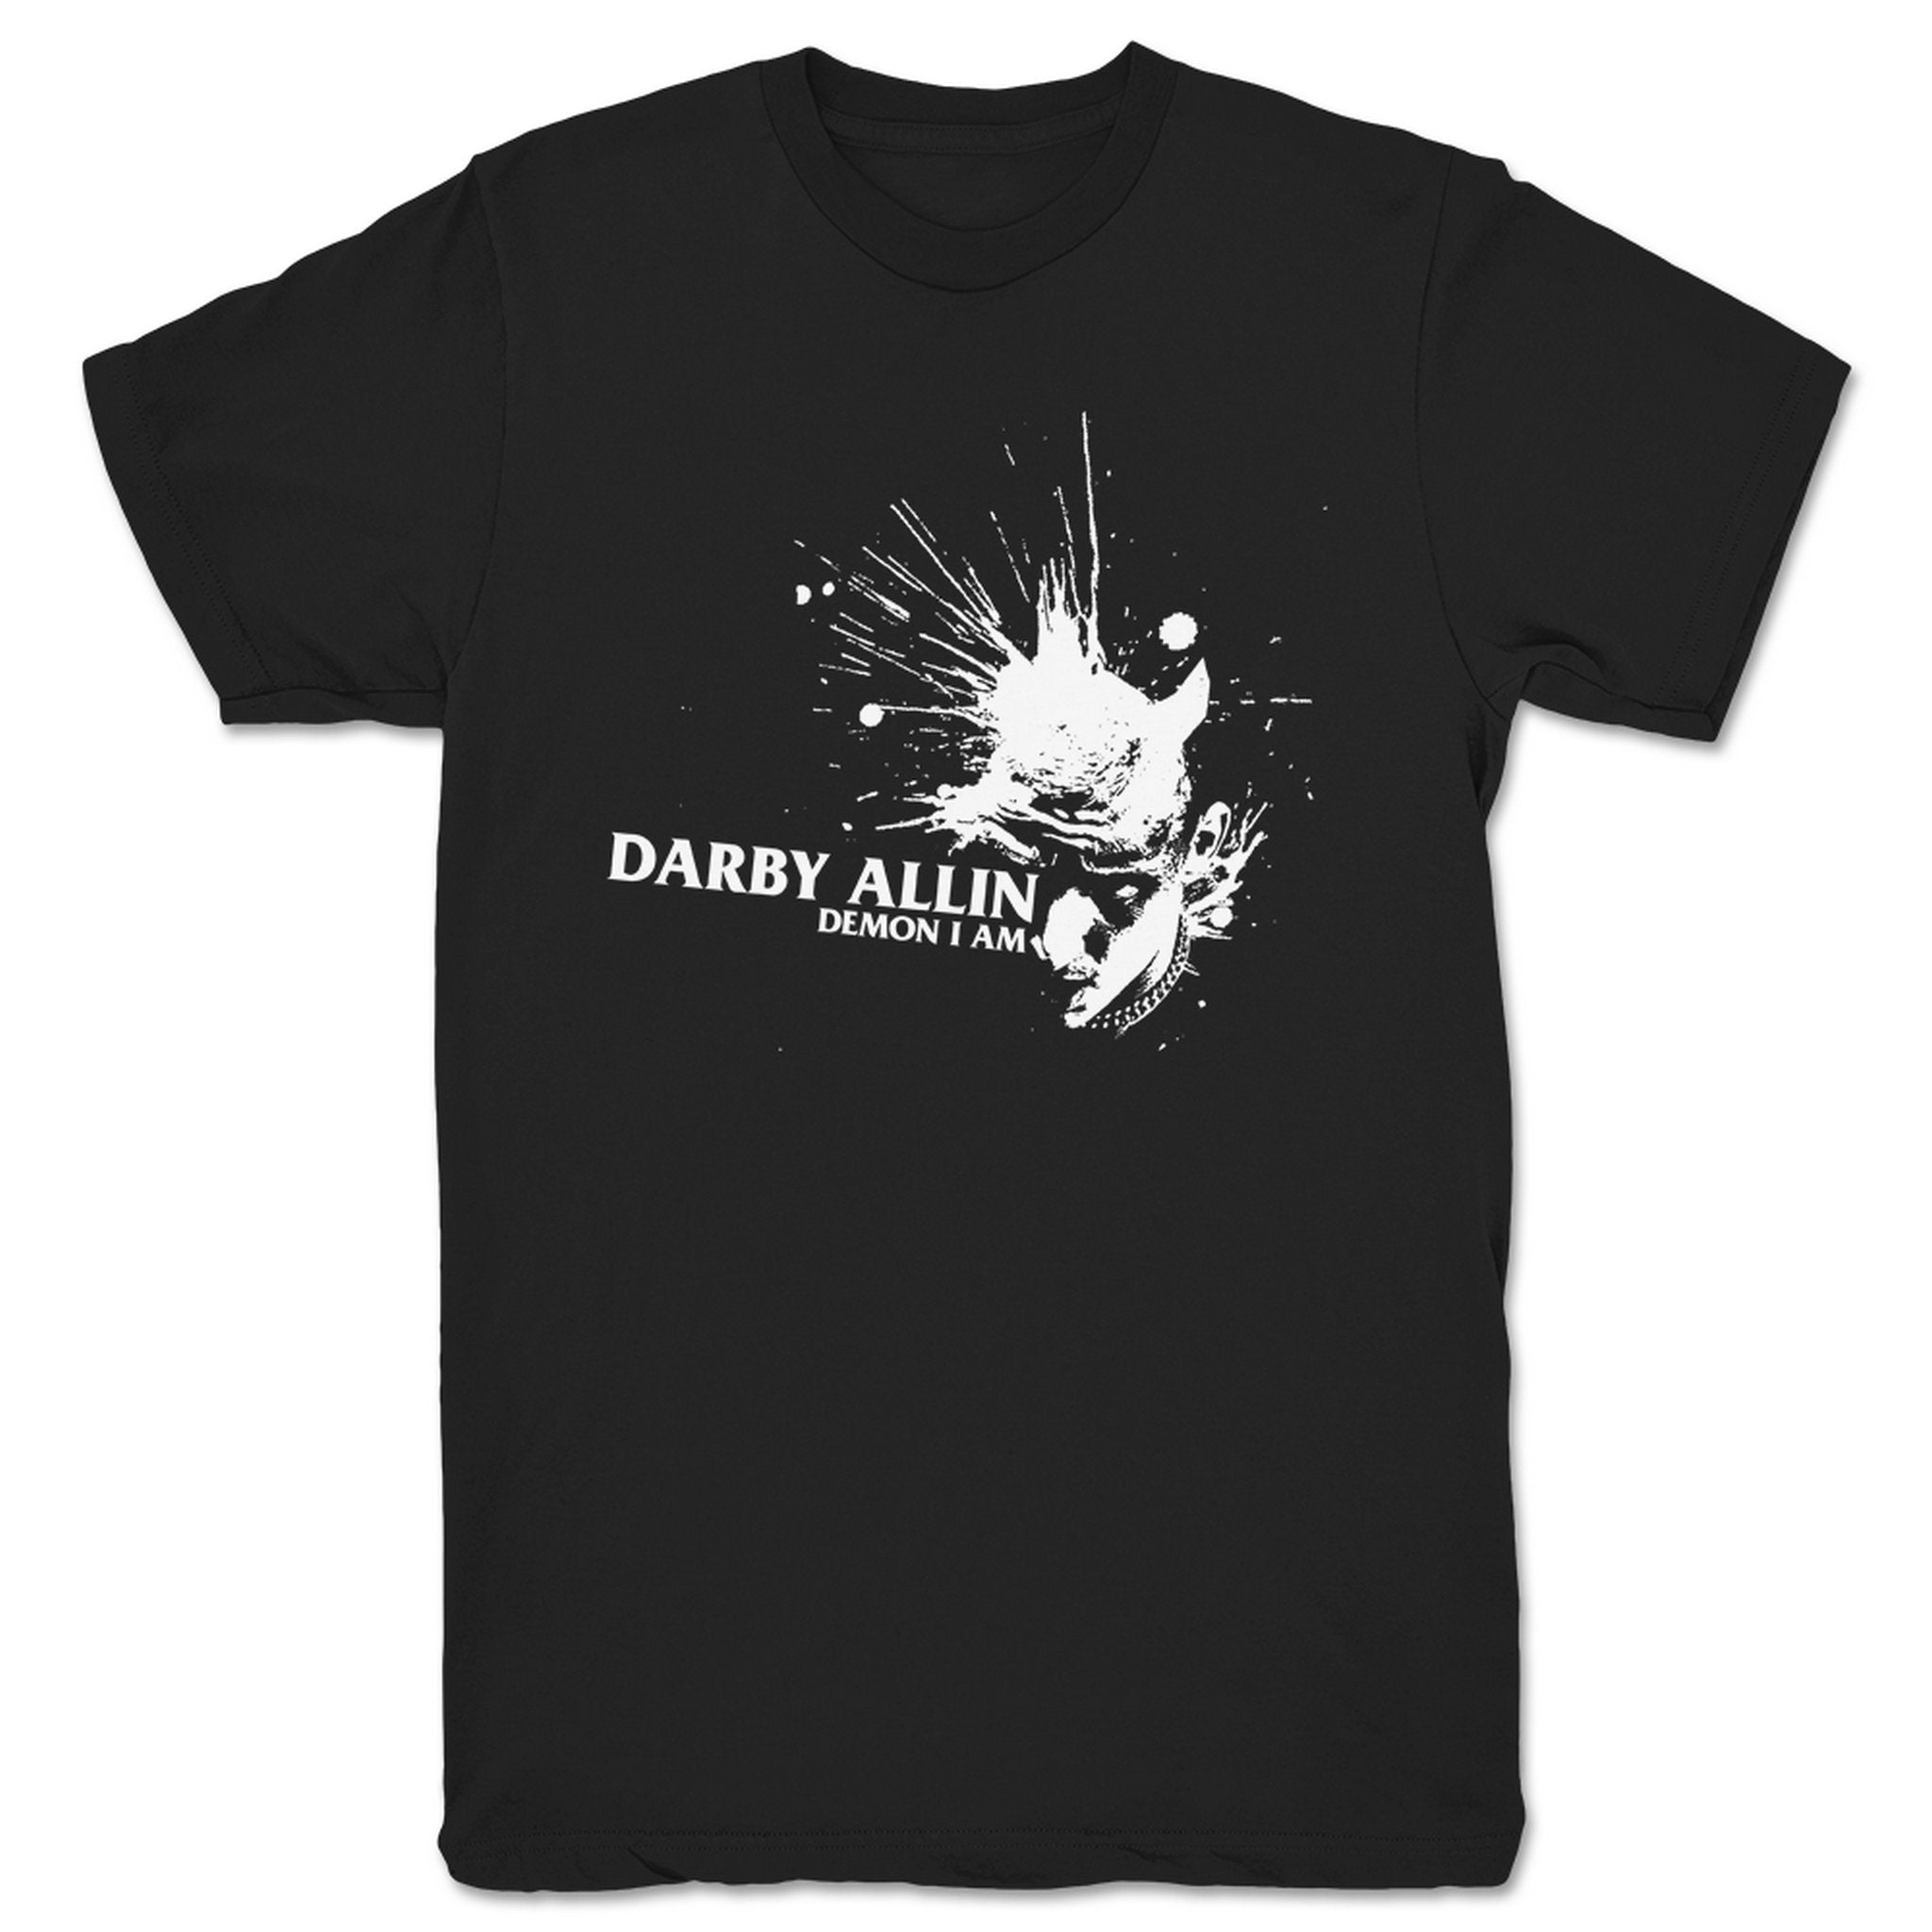 Darby Allin Official Store | What a Maneuver!2048 x 2048